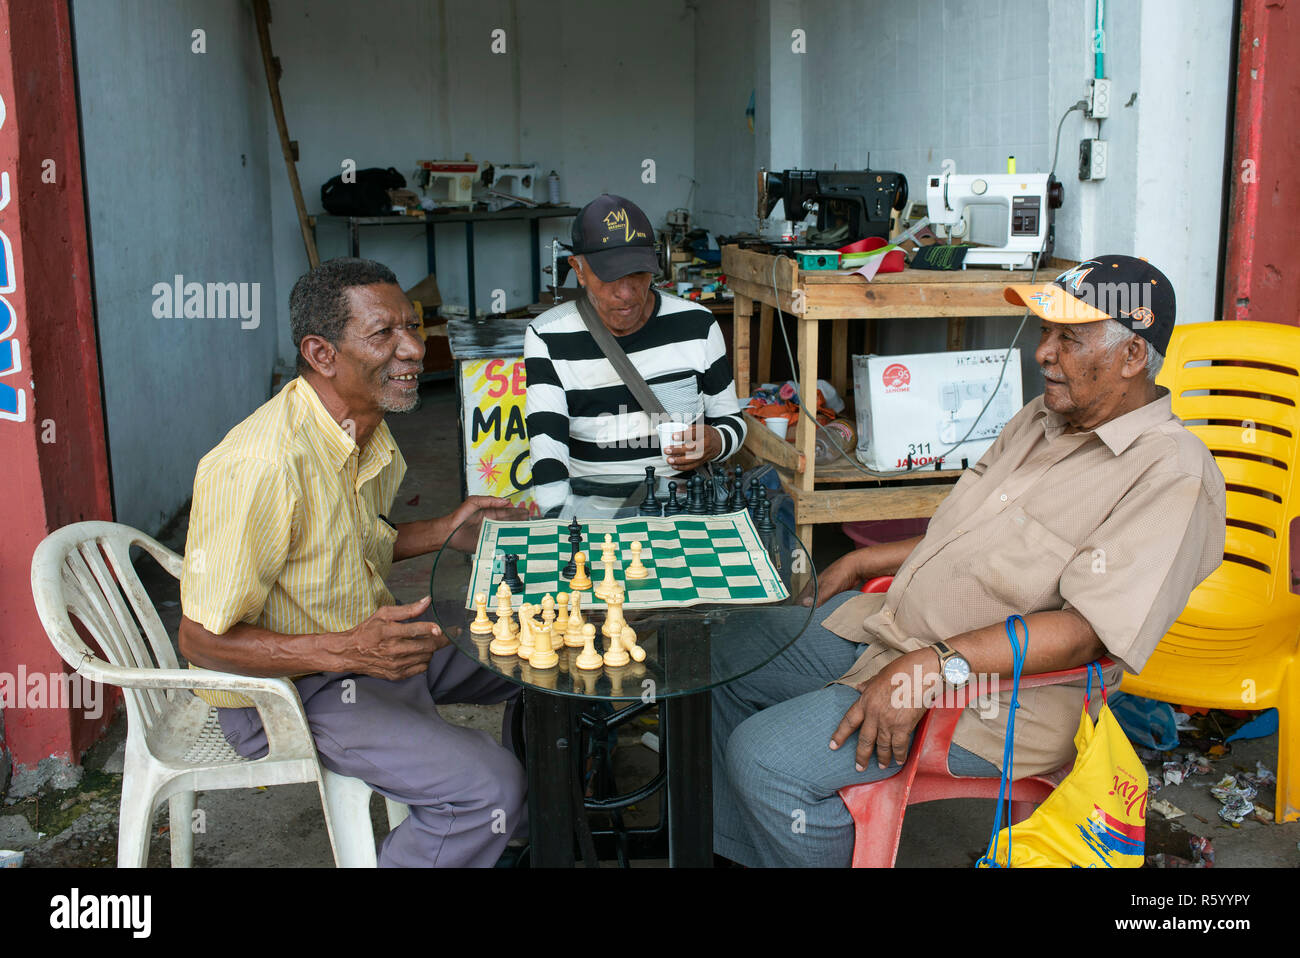 Senior local men playing chess outside a sewing machine repair shop. Daily life in Cartagena de Indias, Colombia. Oct 2018 Stock Photo